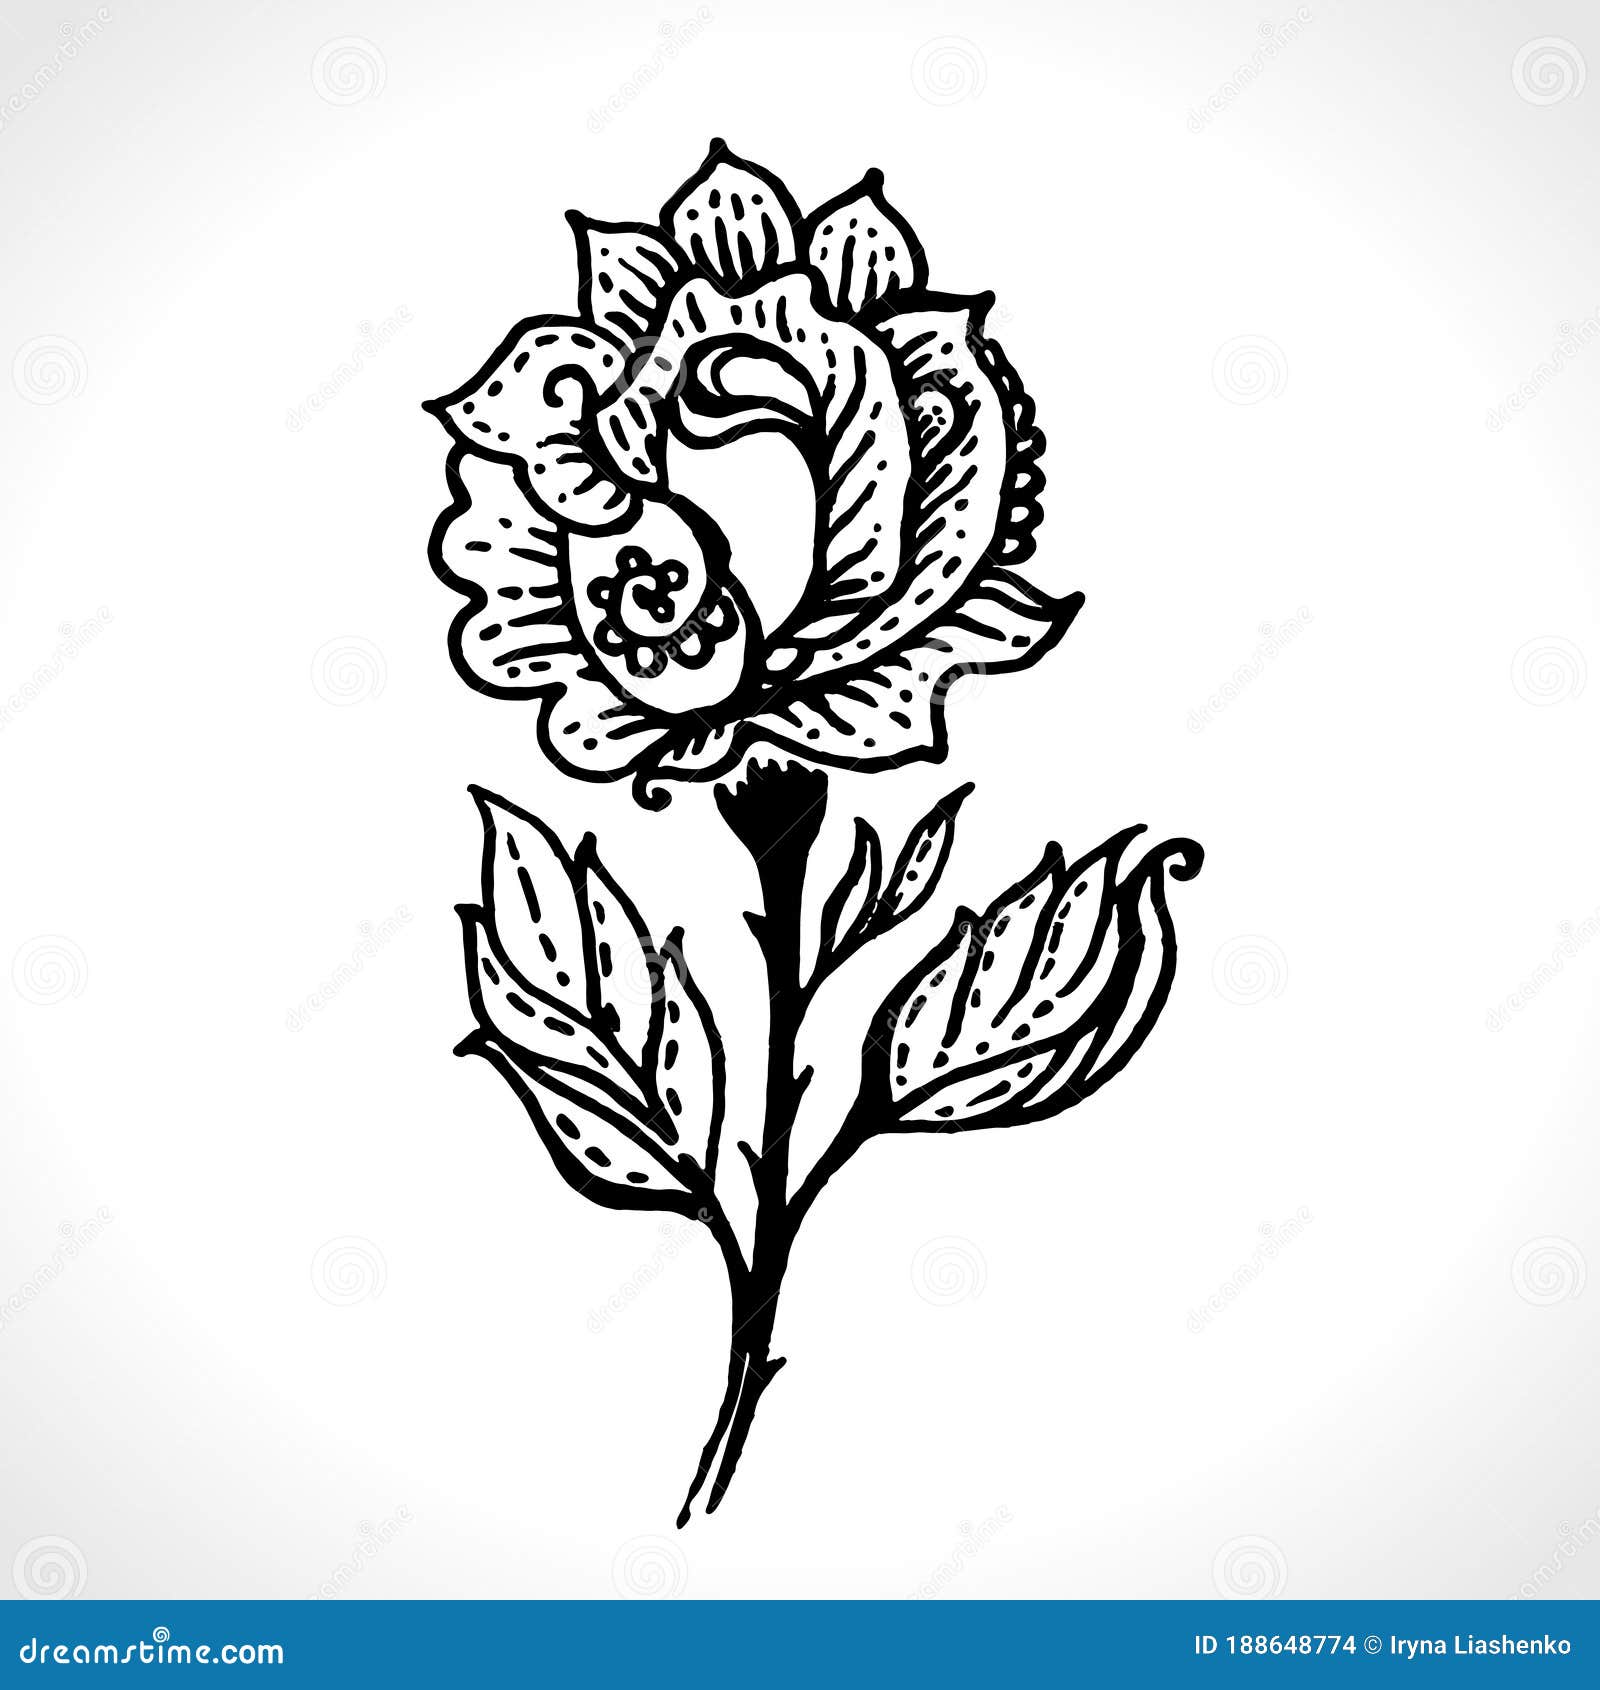 Blooming rose tattoo located on the inner forearm